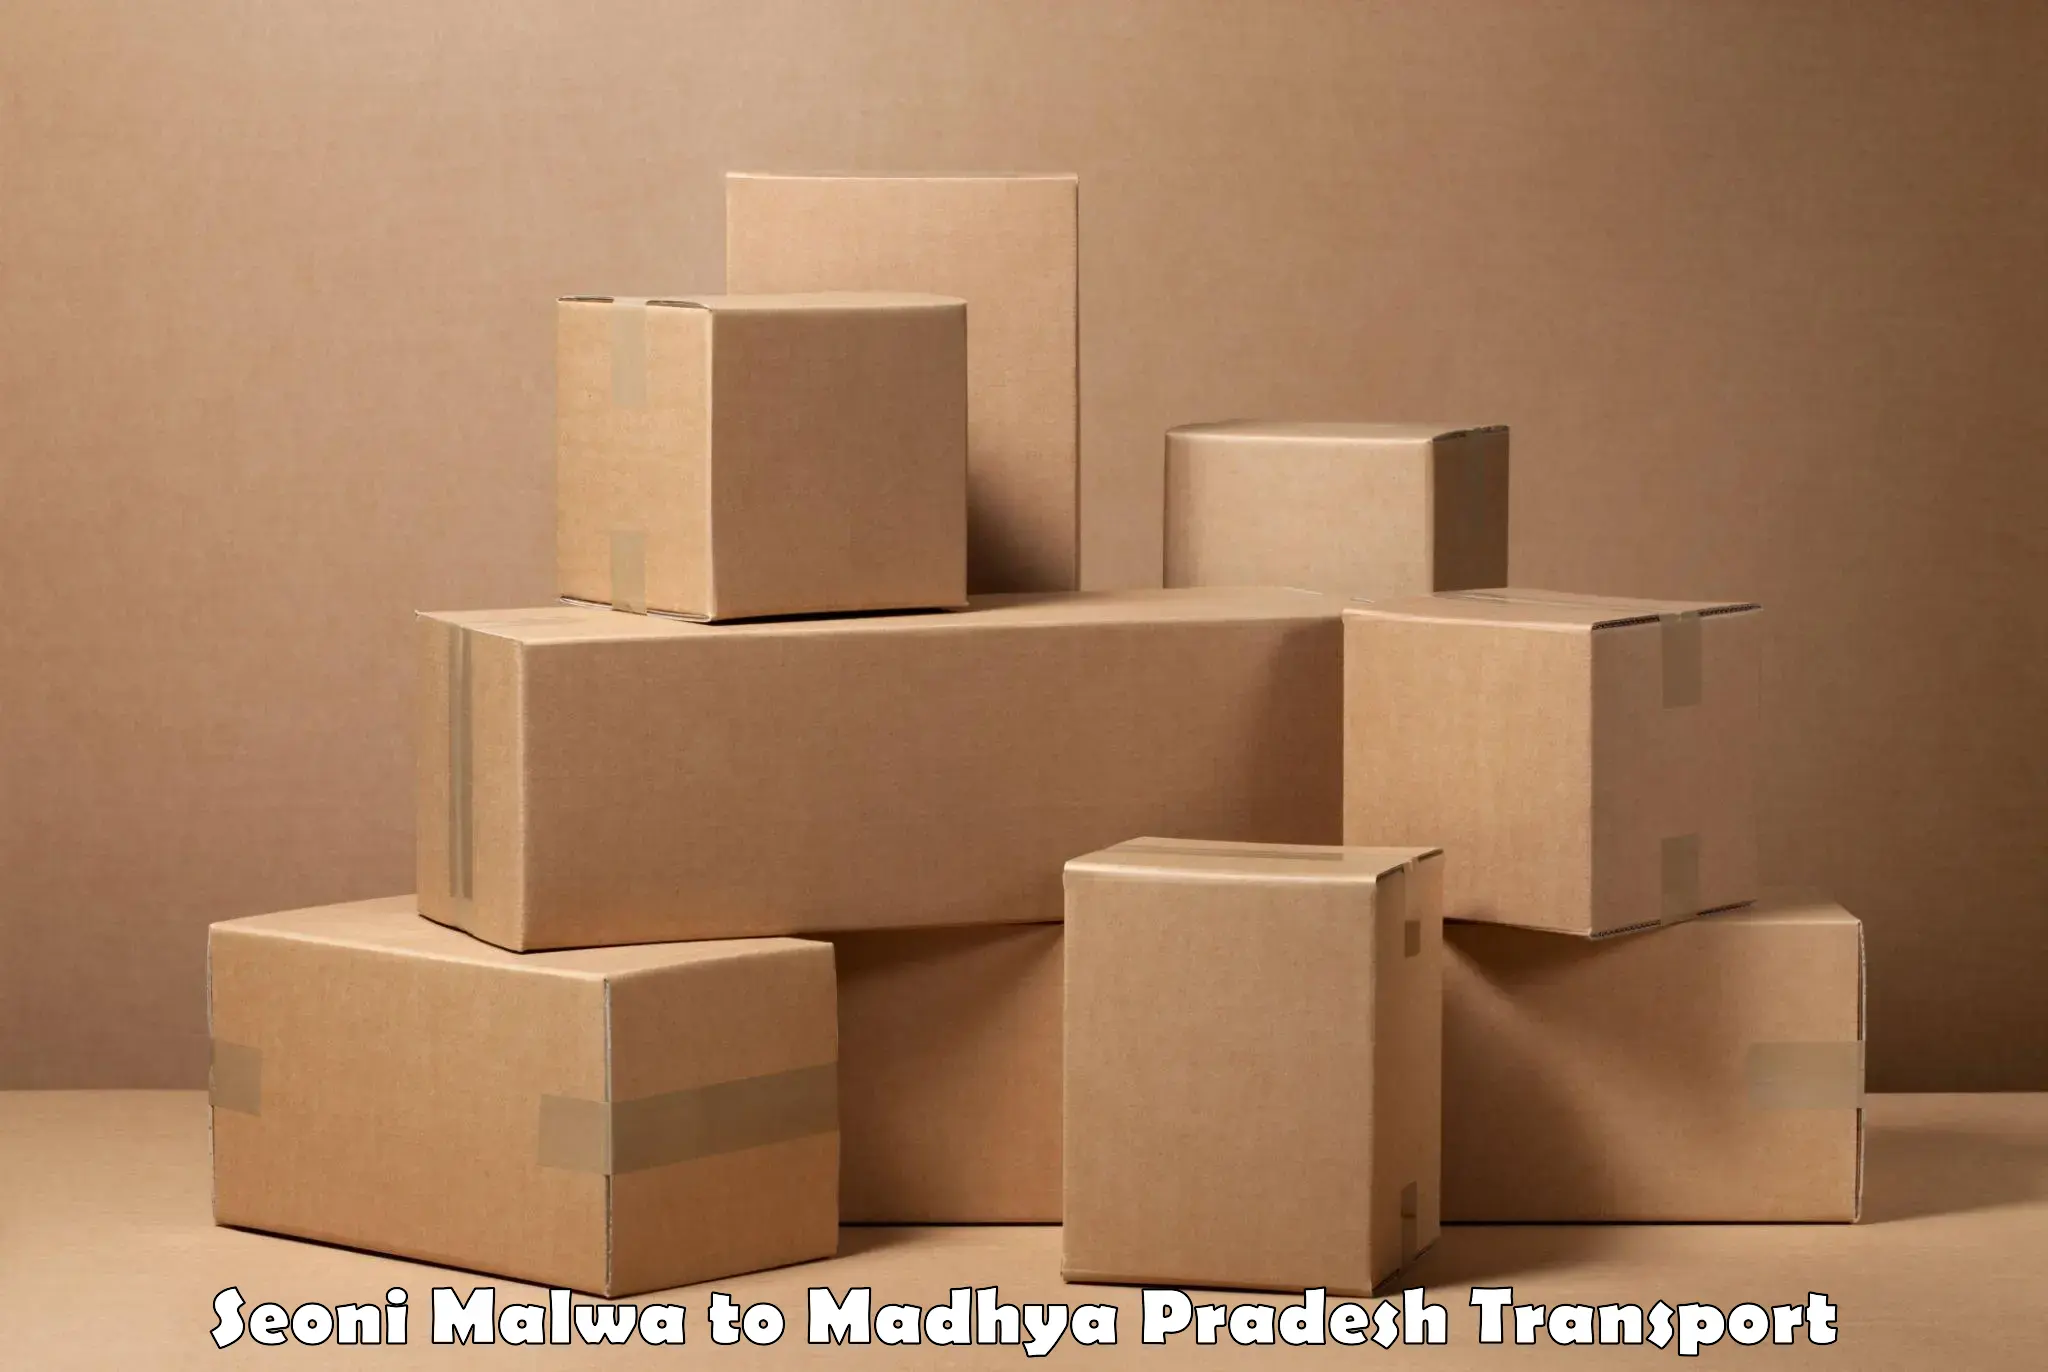 Domestic goods transportation services Seoni Malwa to Athner